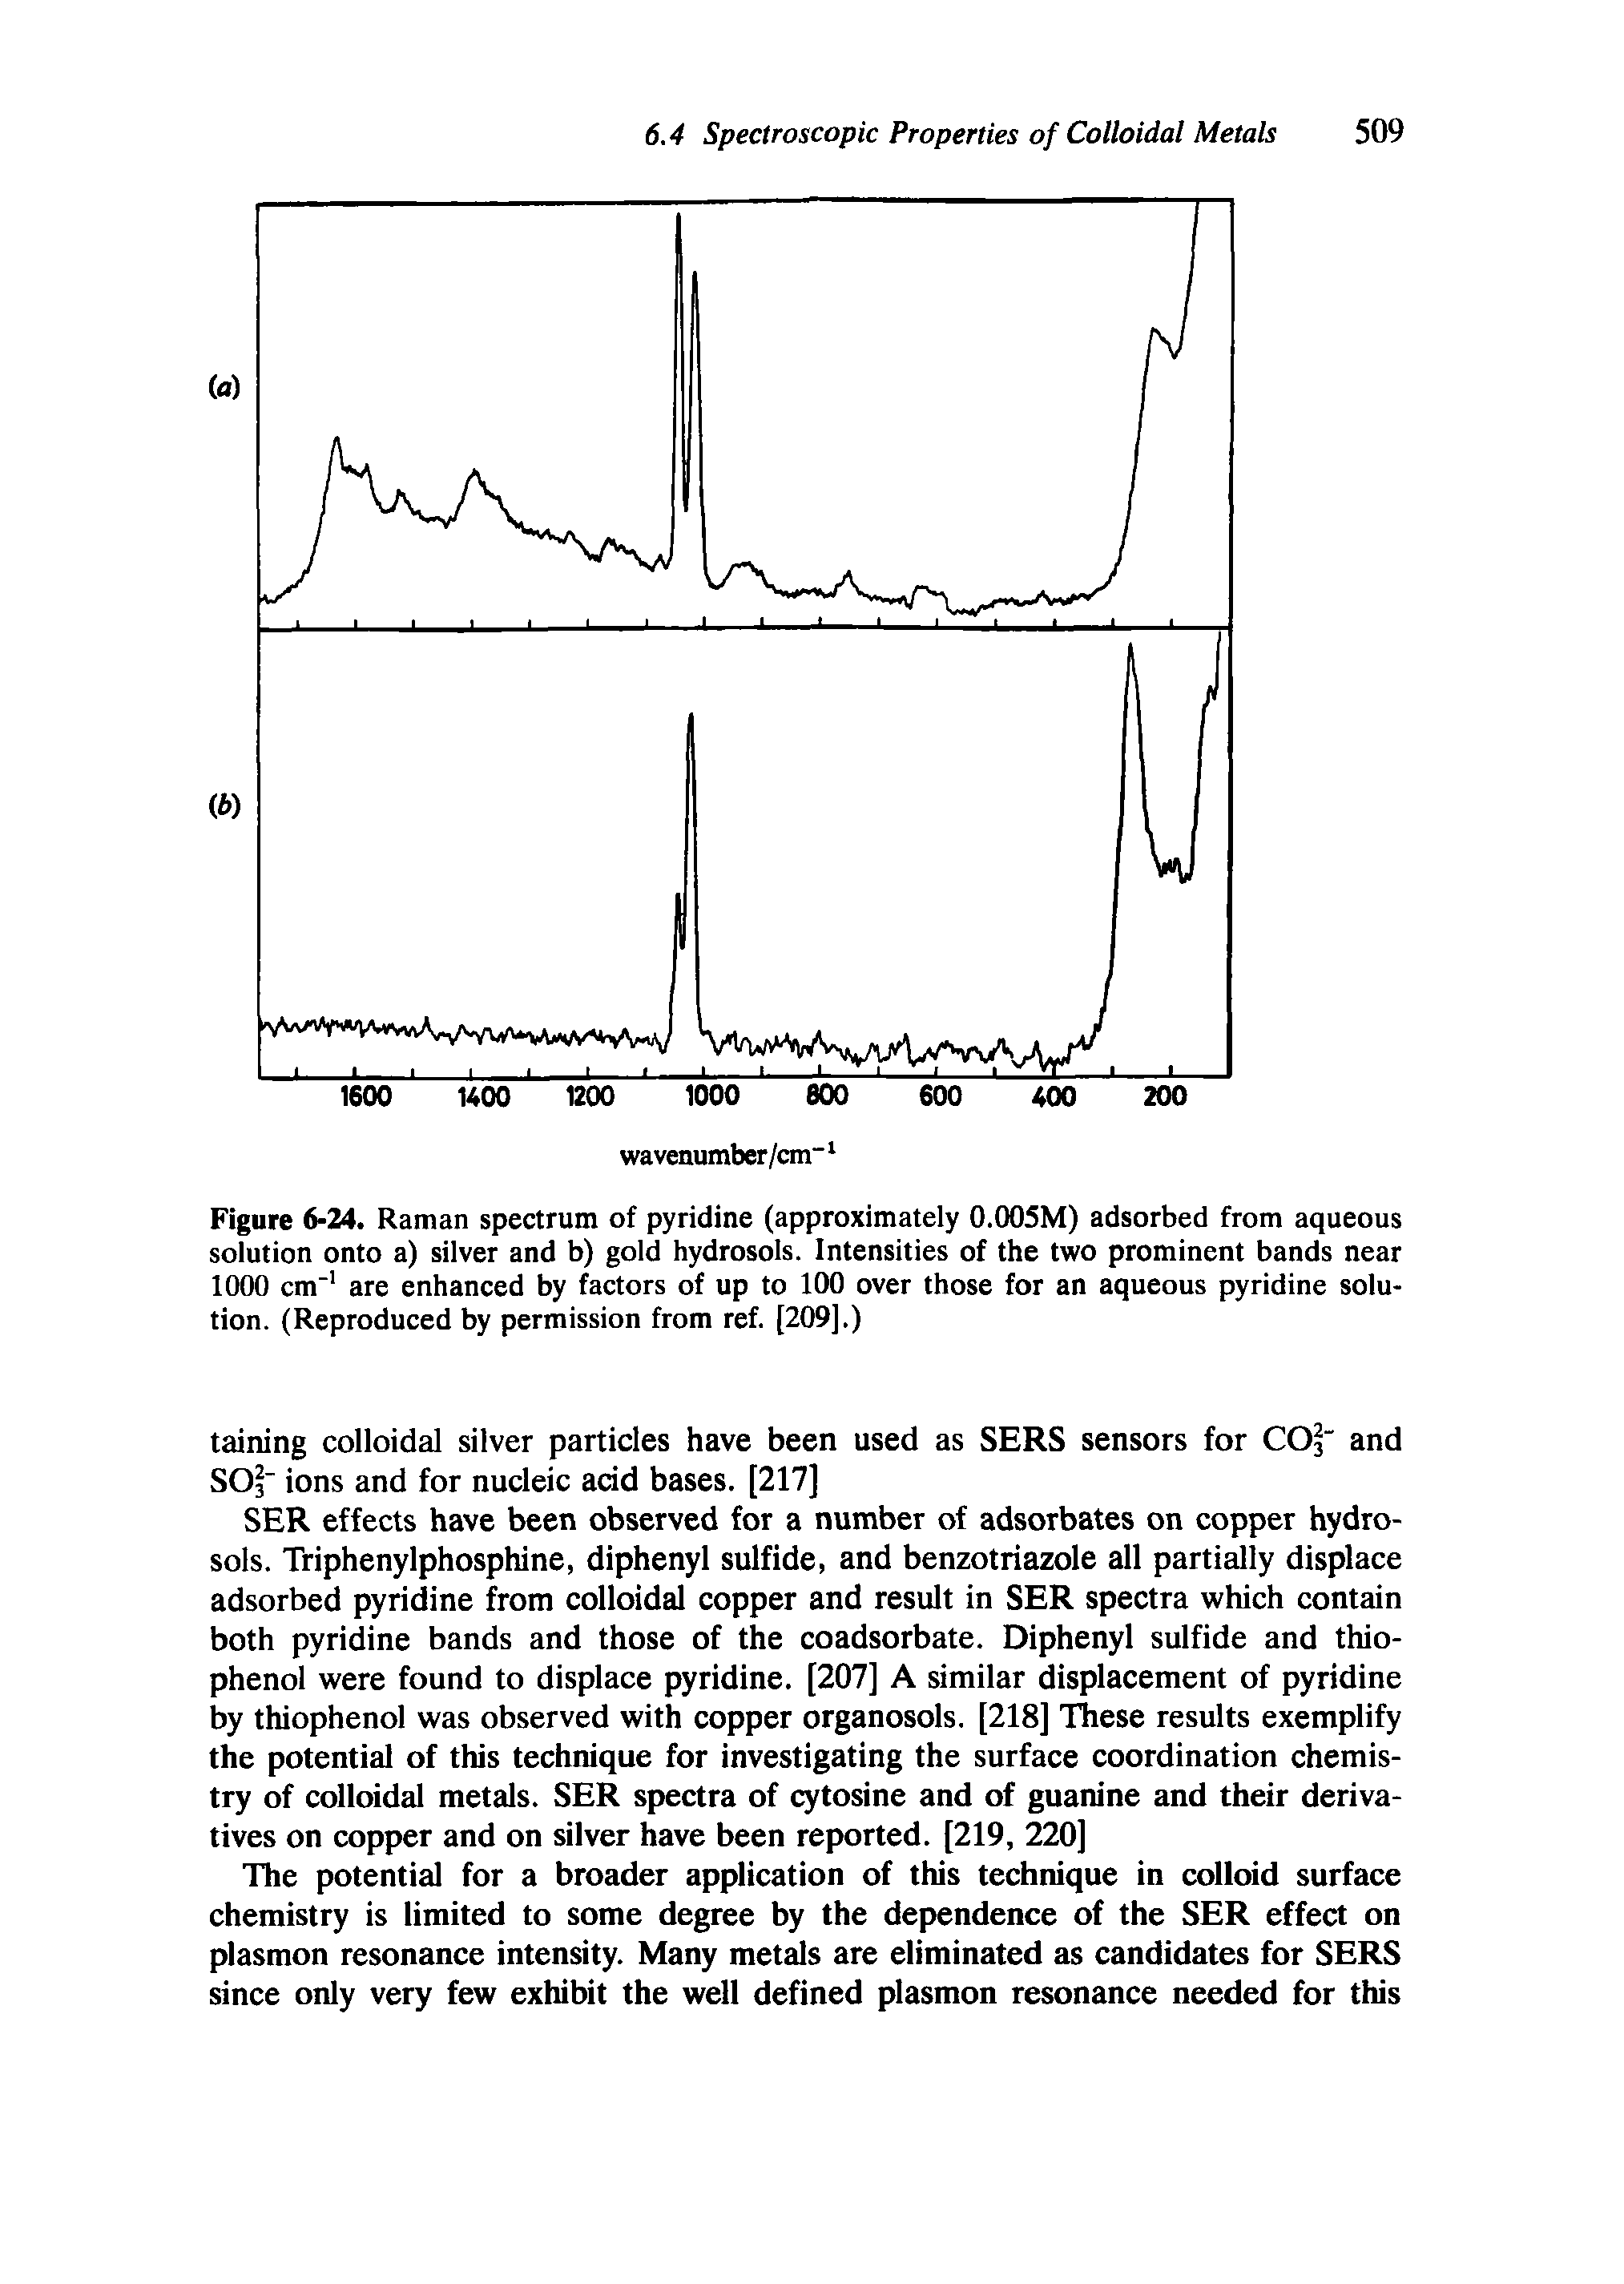 Figure 6-24. Raman spectrum of pyridine (approximately 0.005M) adsorbed from aqueous solution onto a) silver and b) gold hydrosols. Intensities of the two prominent bands near 1000 cm" are enhanced by factors of up to 100 over those for an aqueous pyridine solution. (Reproduced by permission from ref. [209],)...